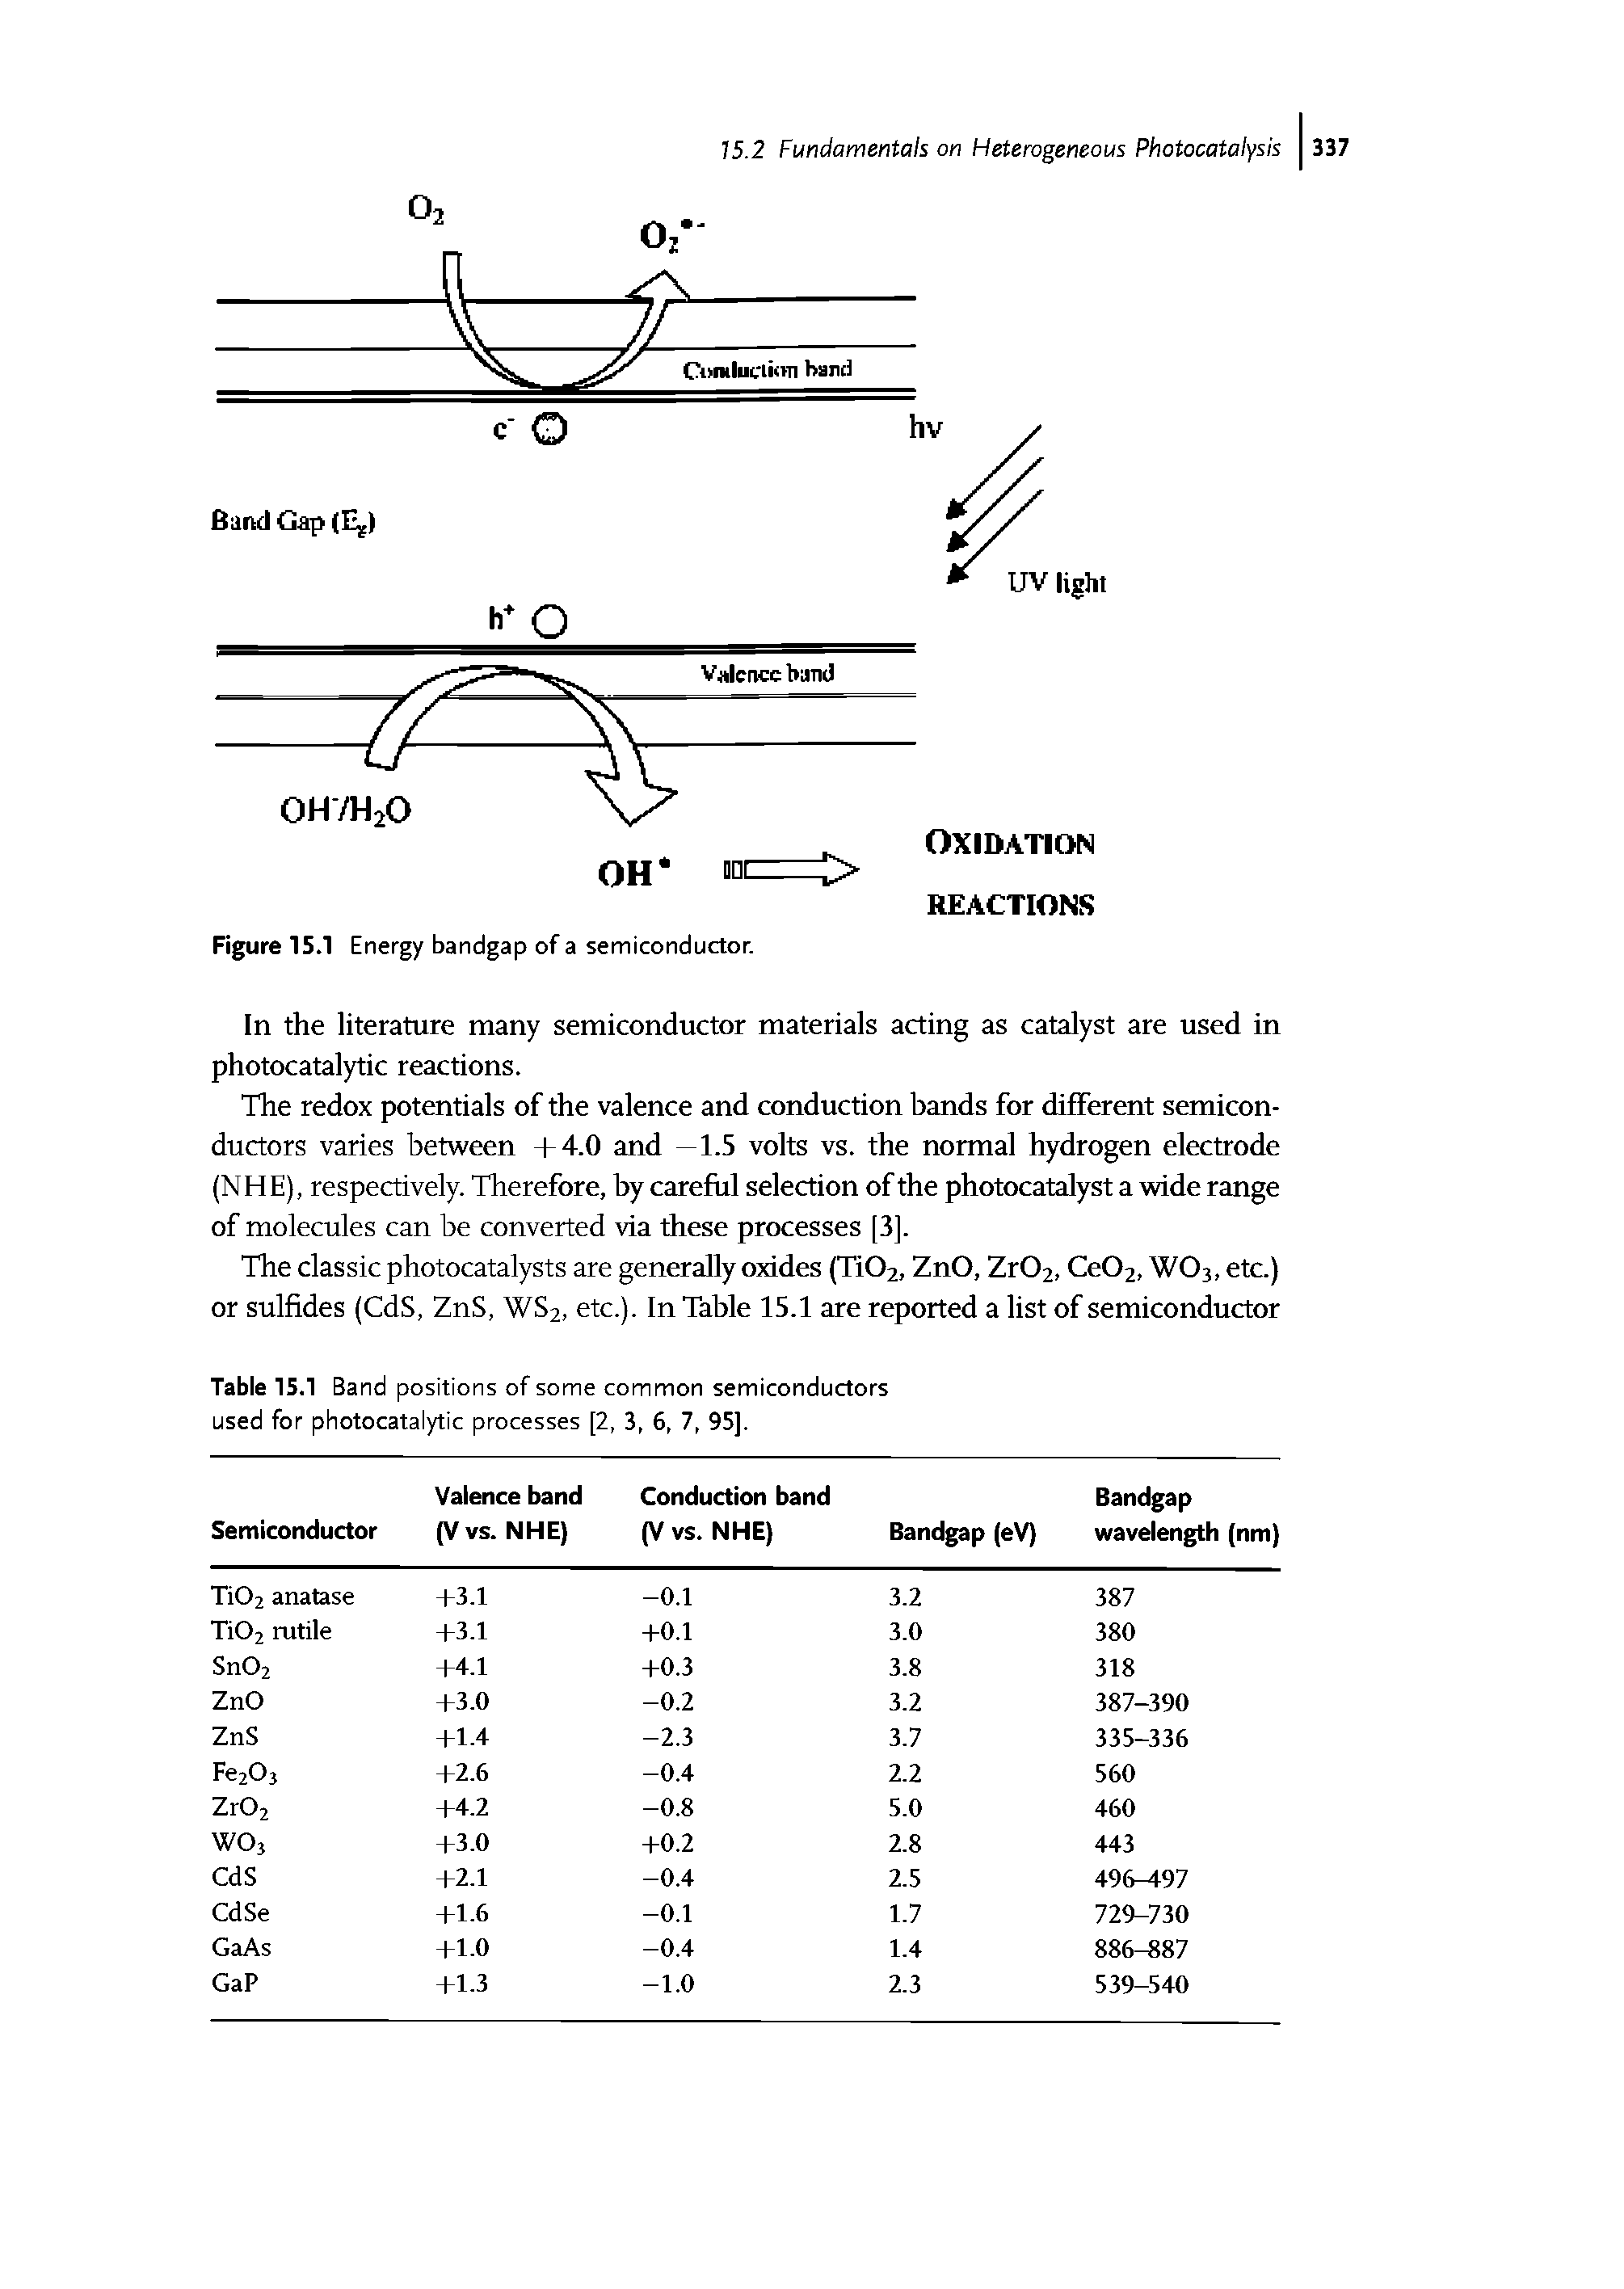 Table 15.1 Band positions of some common semiconductors used for photocatalytic processes [2, 3, 6, 7, 95].